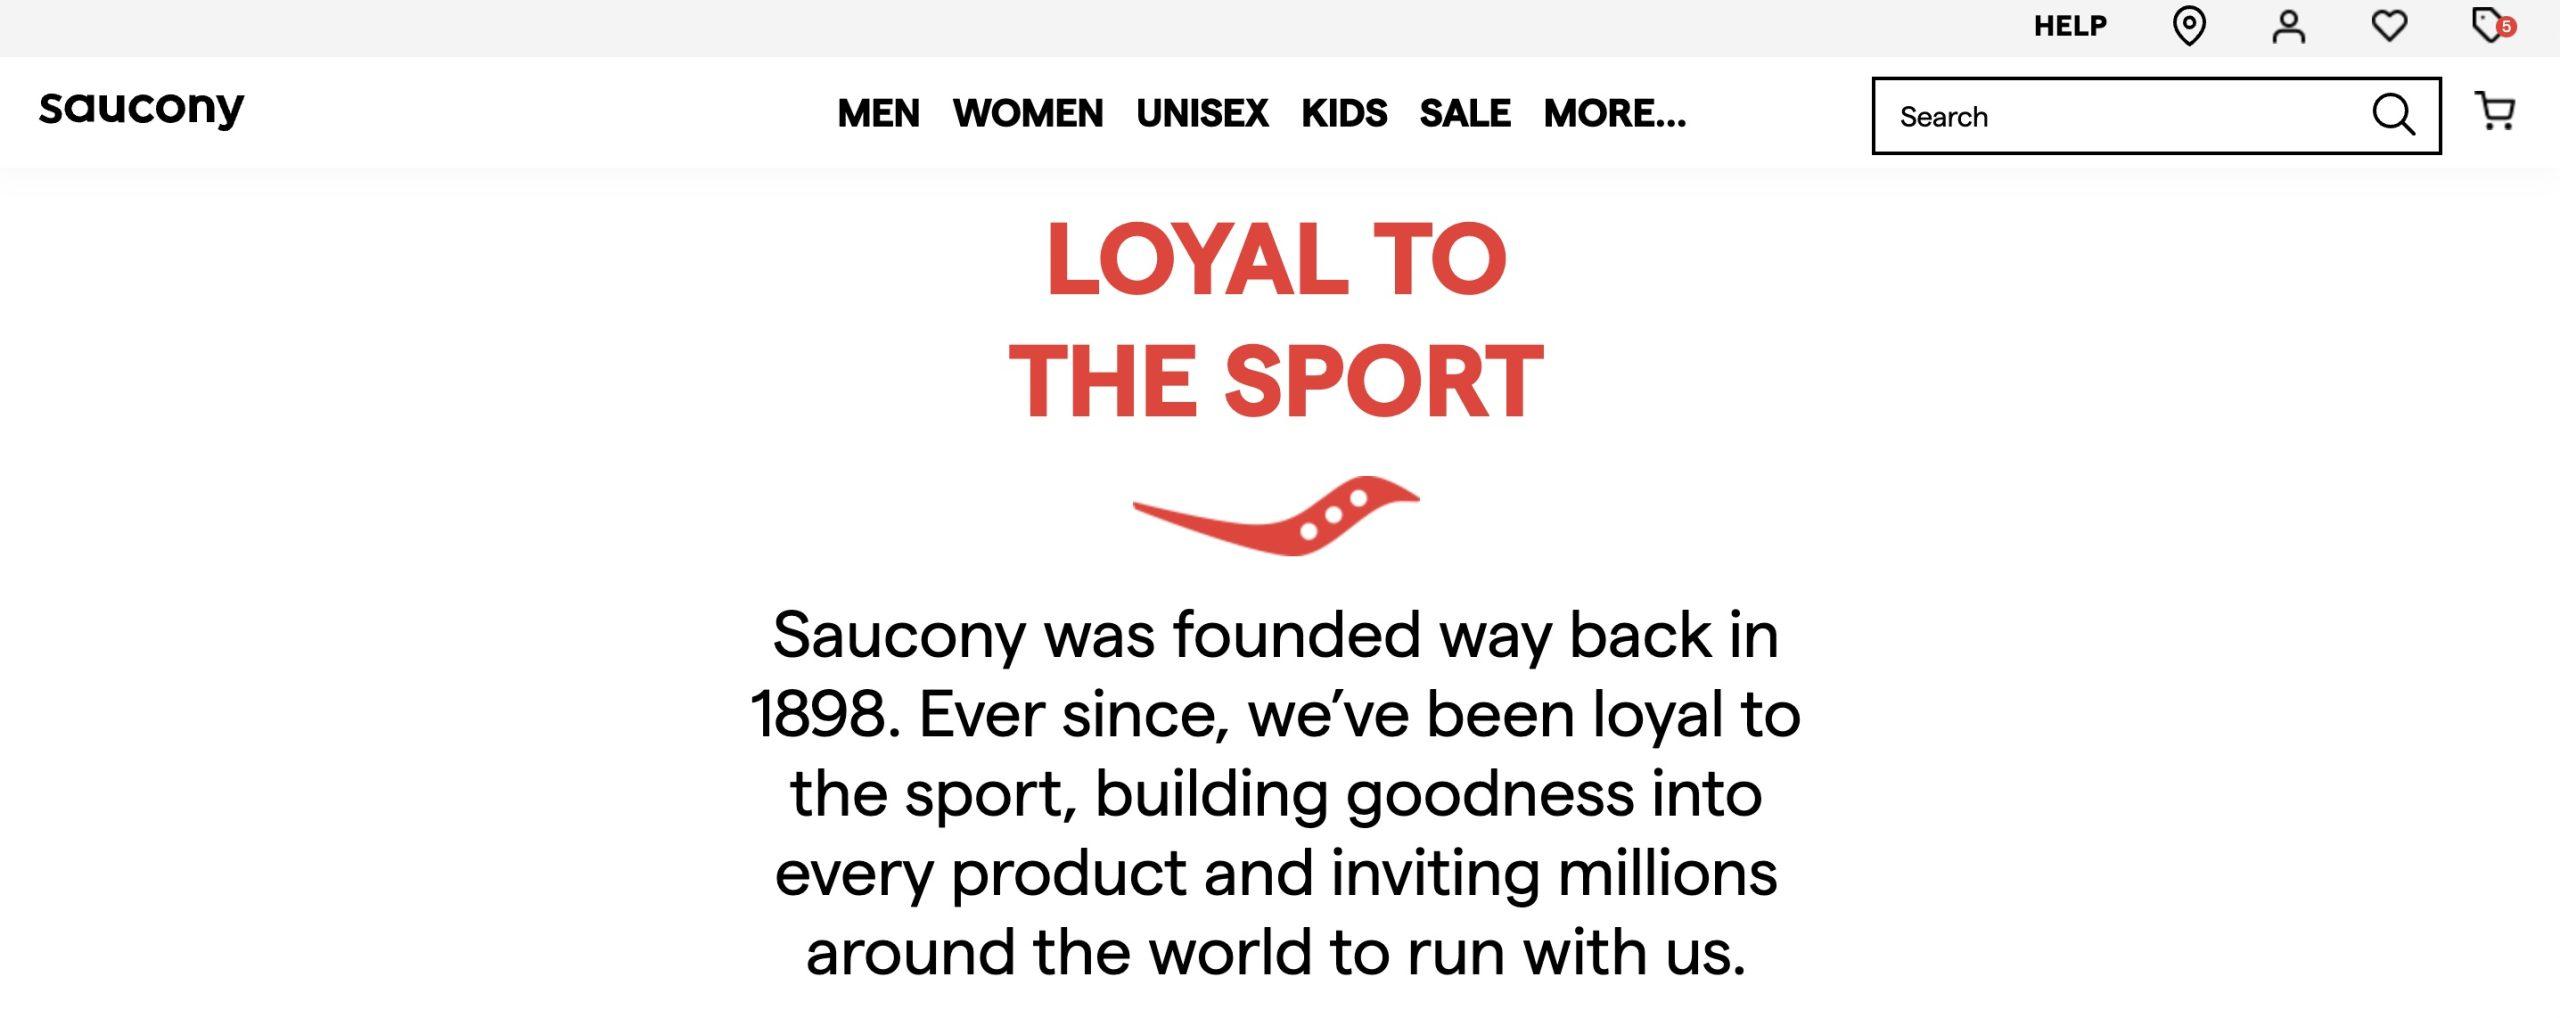 Saucony loyal to the sport of their company